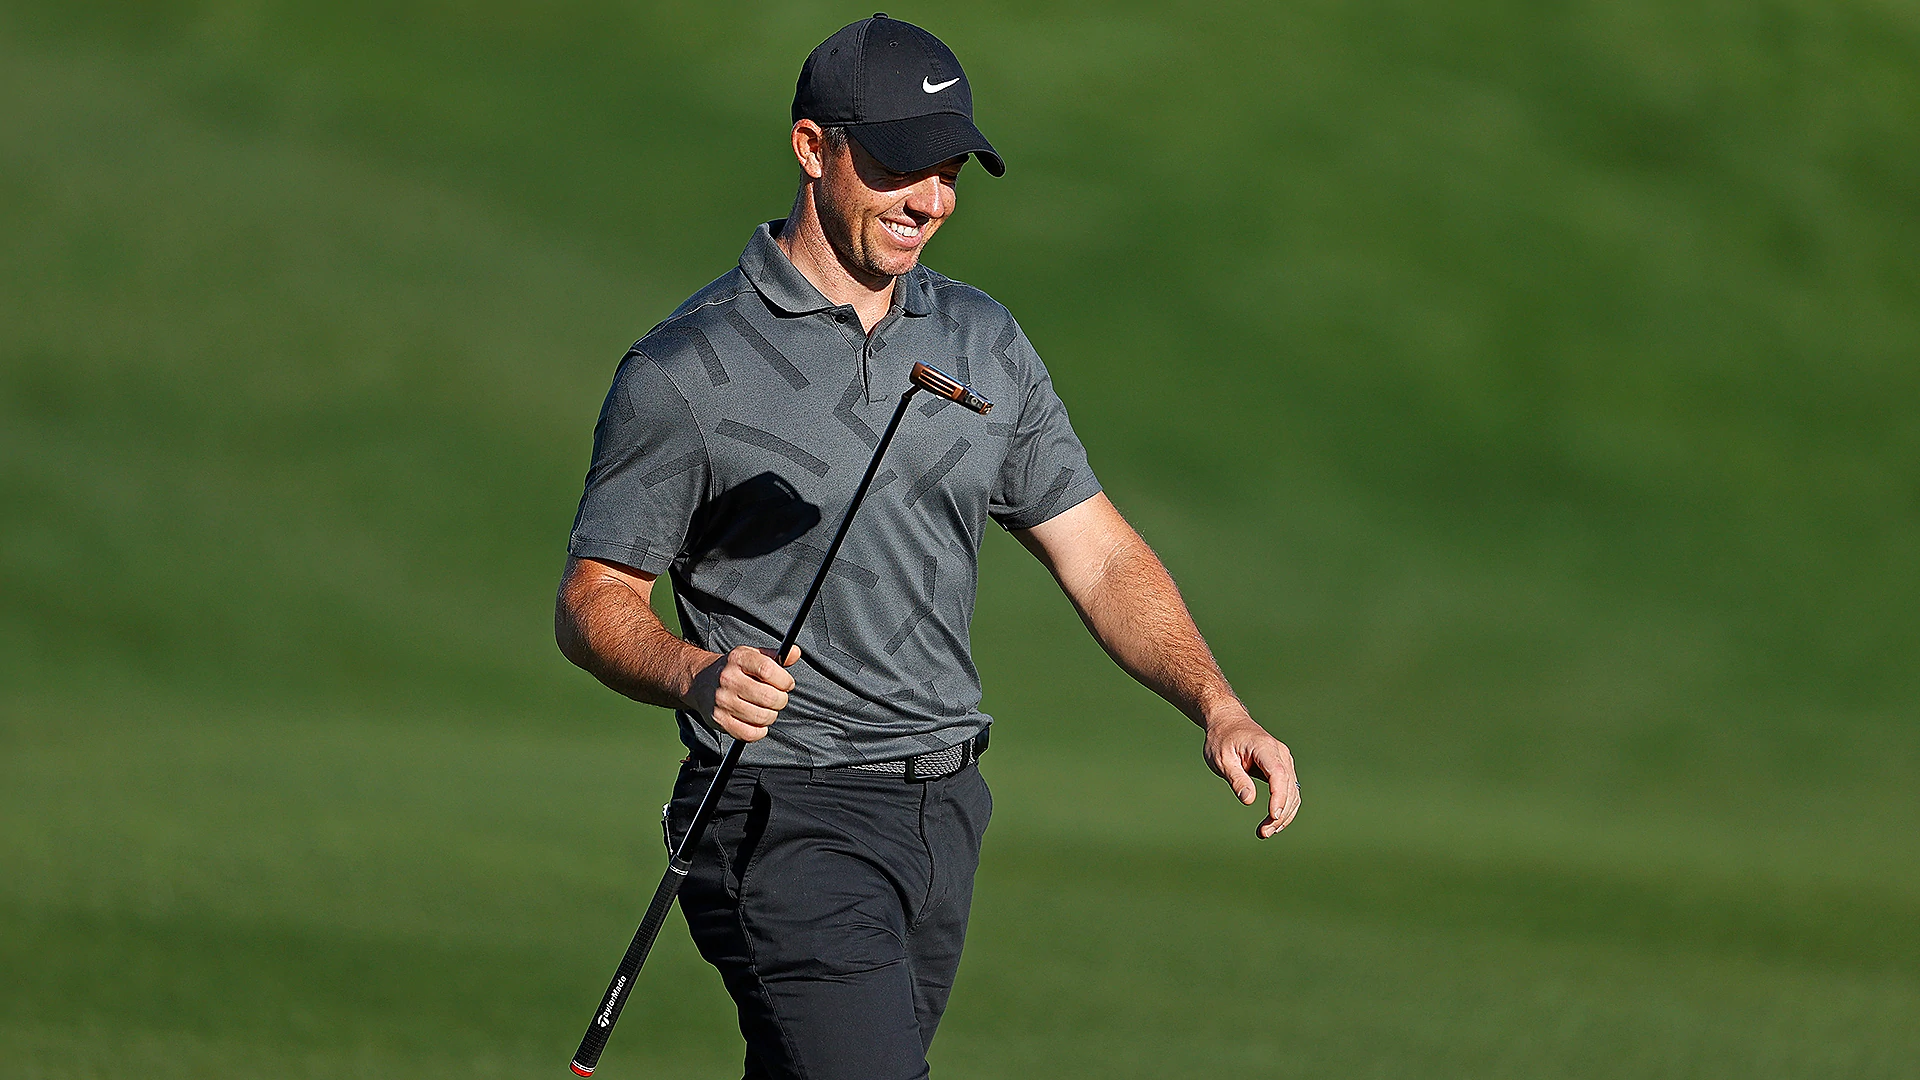 Rory McIlroy elected PGA Tour player advisory council chairman for 2021